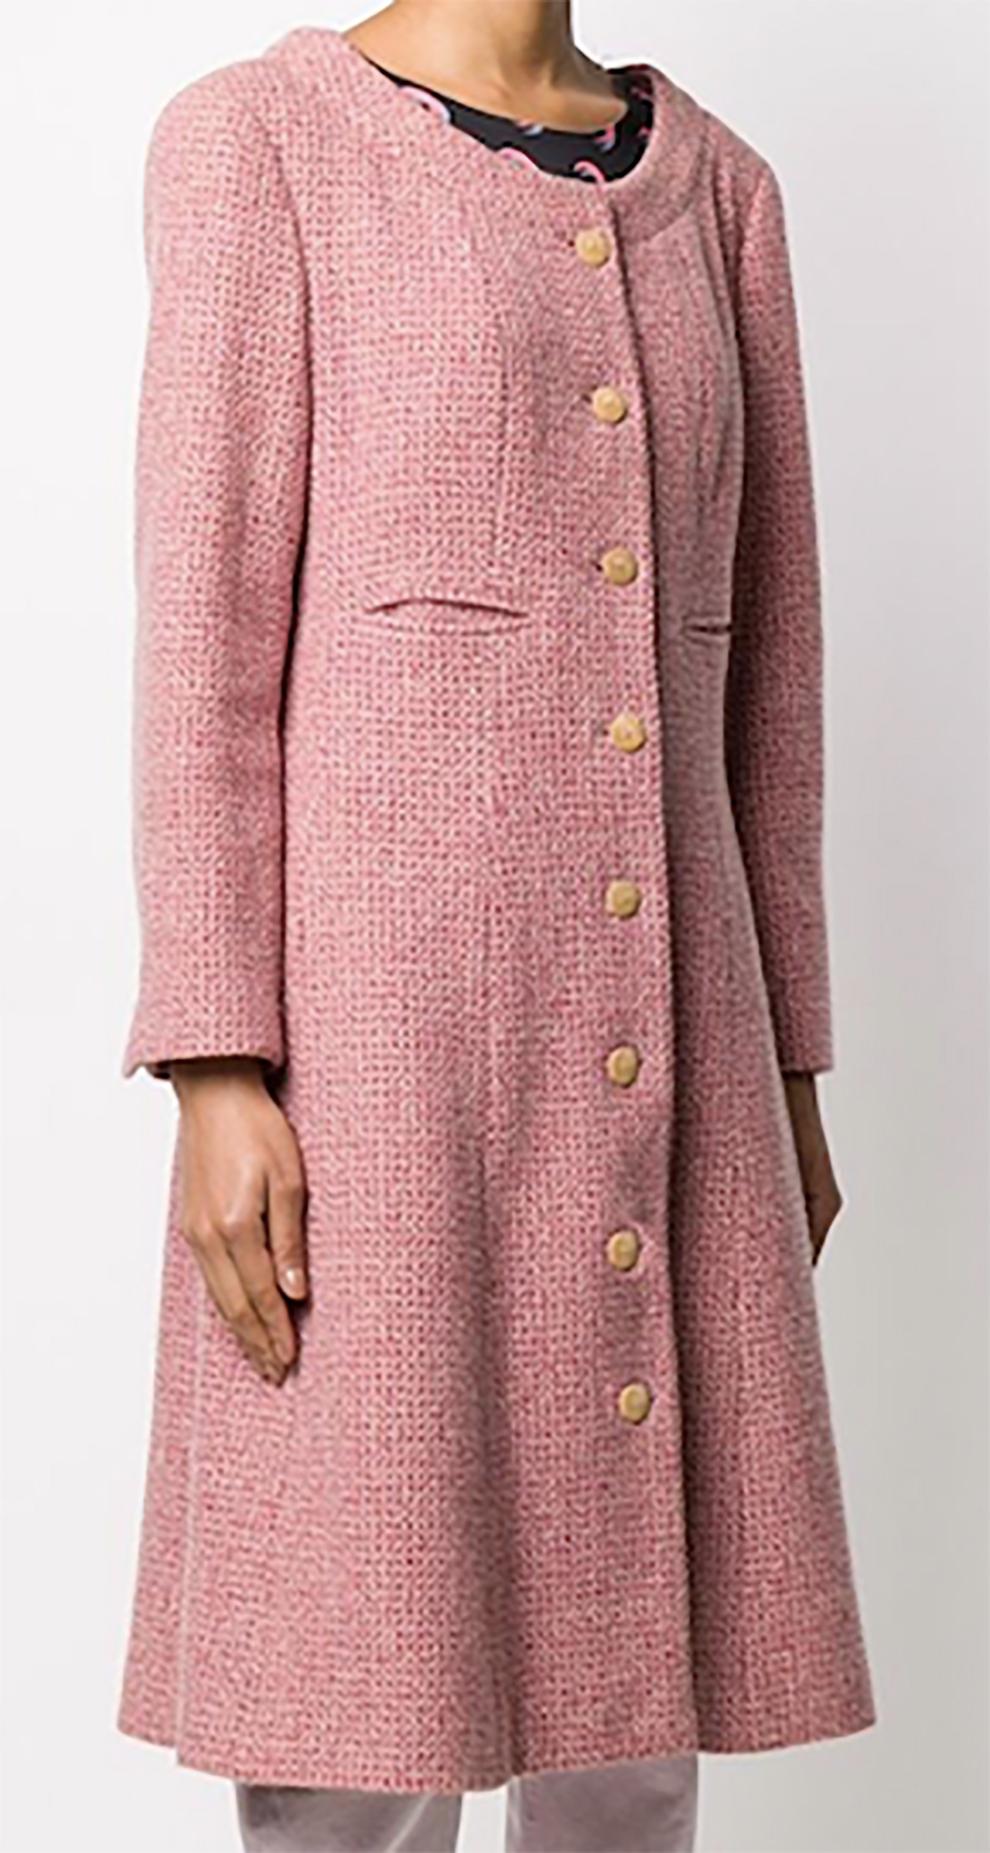 Chanel 2001s collarless flared midi coat jacket featuring a woven design, a collarless design, a front logo button fastening, long sleeves, button cuffs, front welt pockets, a flared skirt and a mid-length, a silk lining.
Composition: 100%cashmere